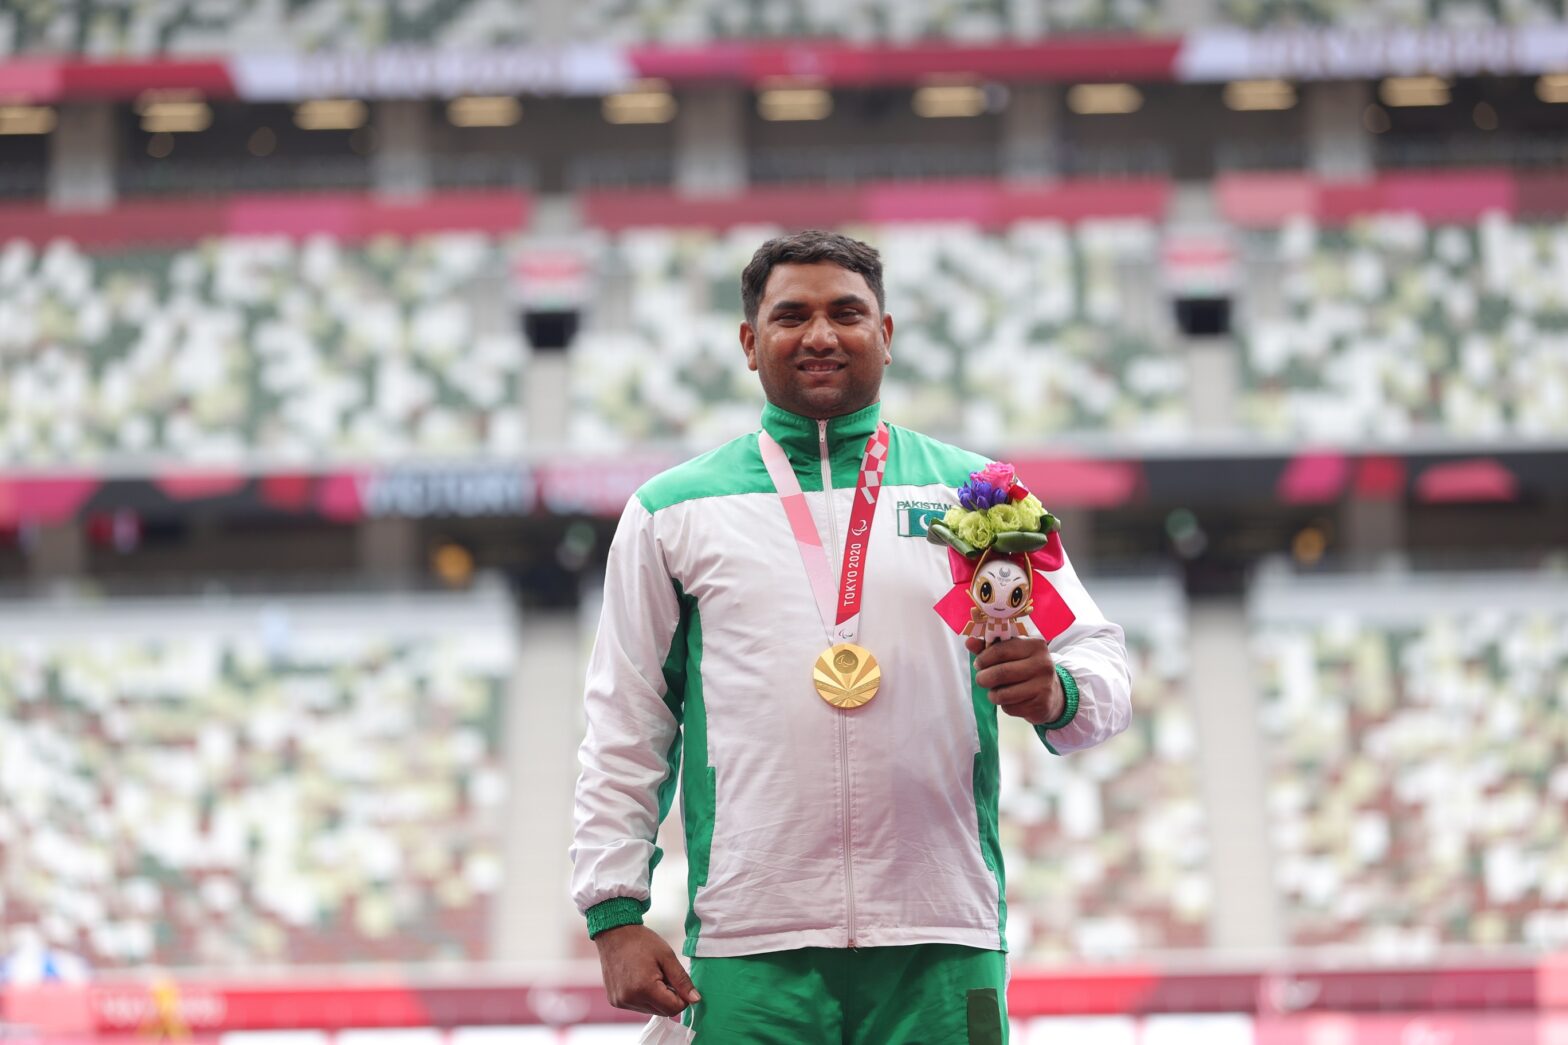 Haider wins gold medal to qualify for Paris 2024 Paralympics